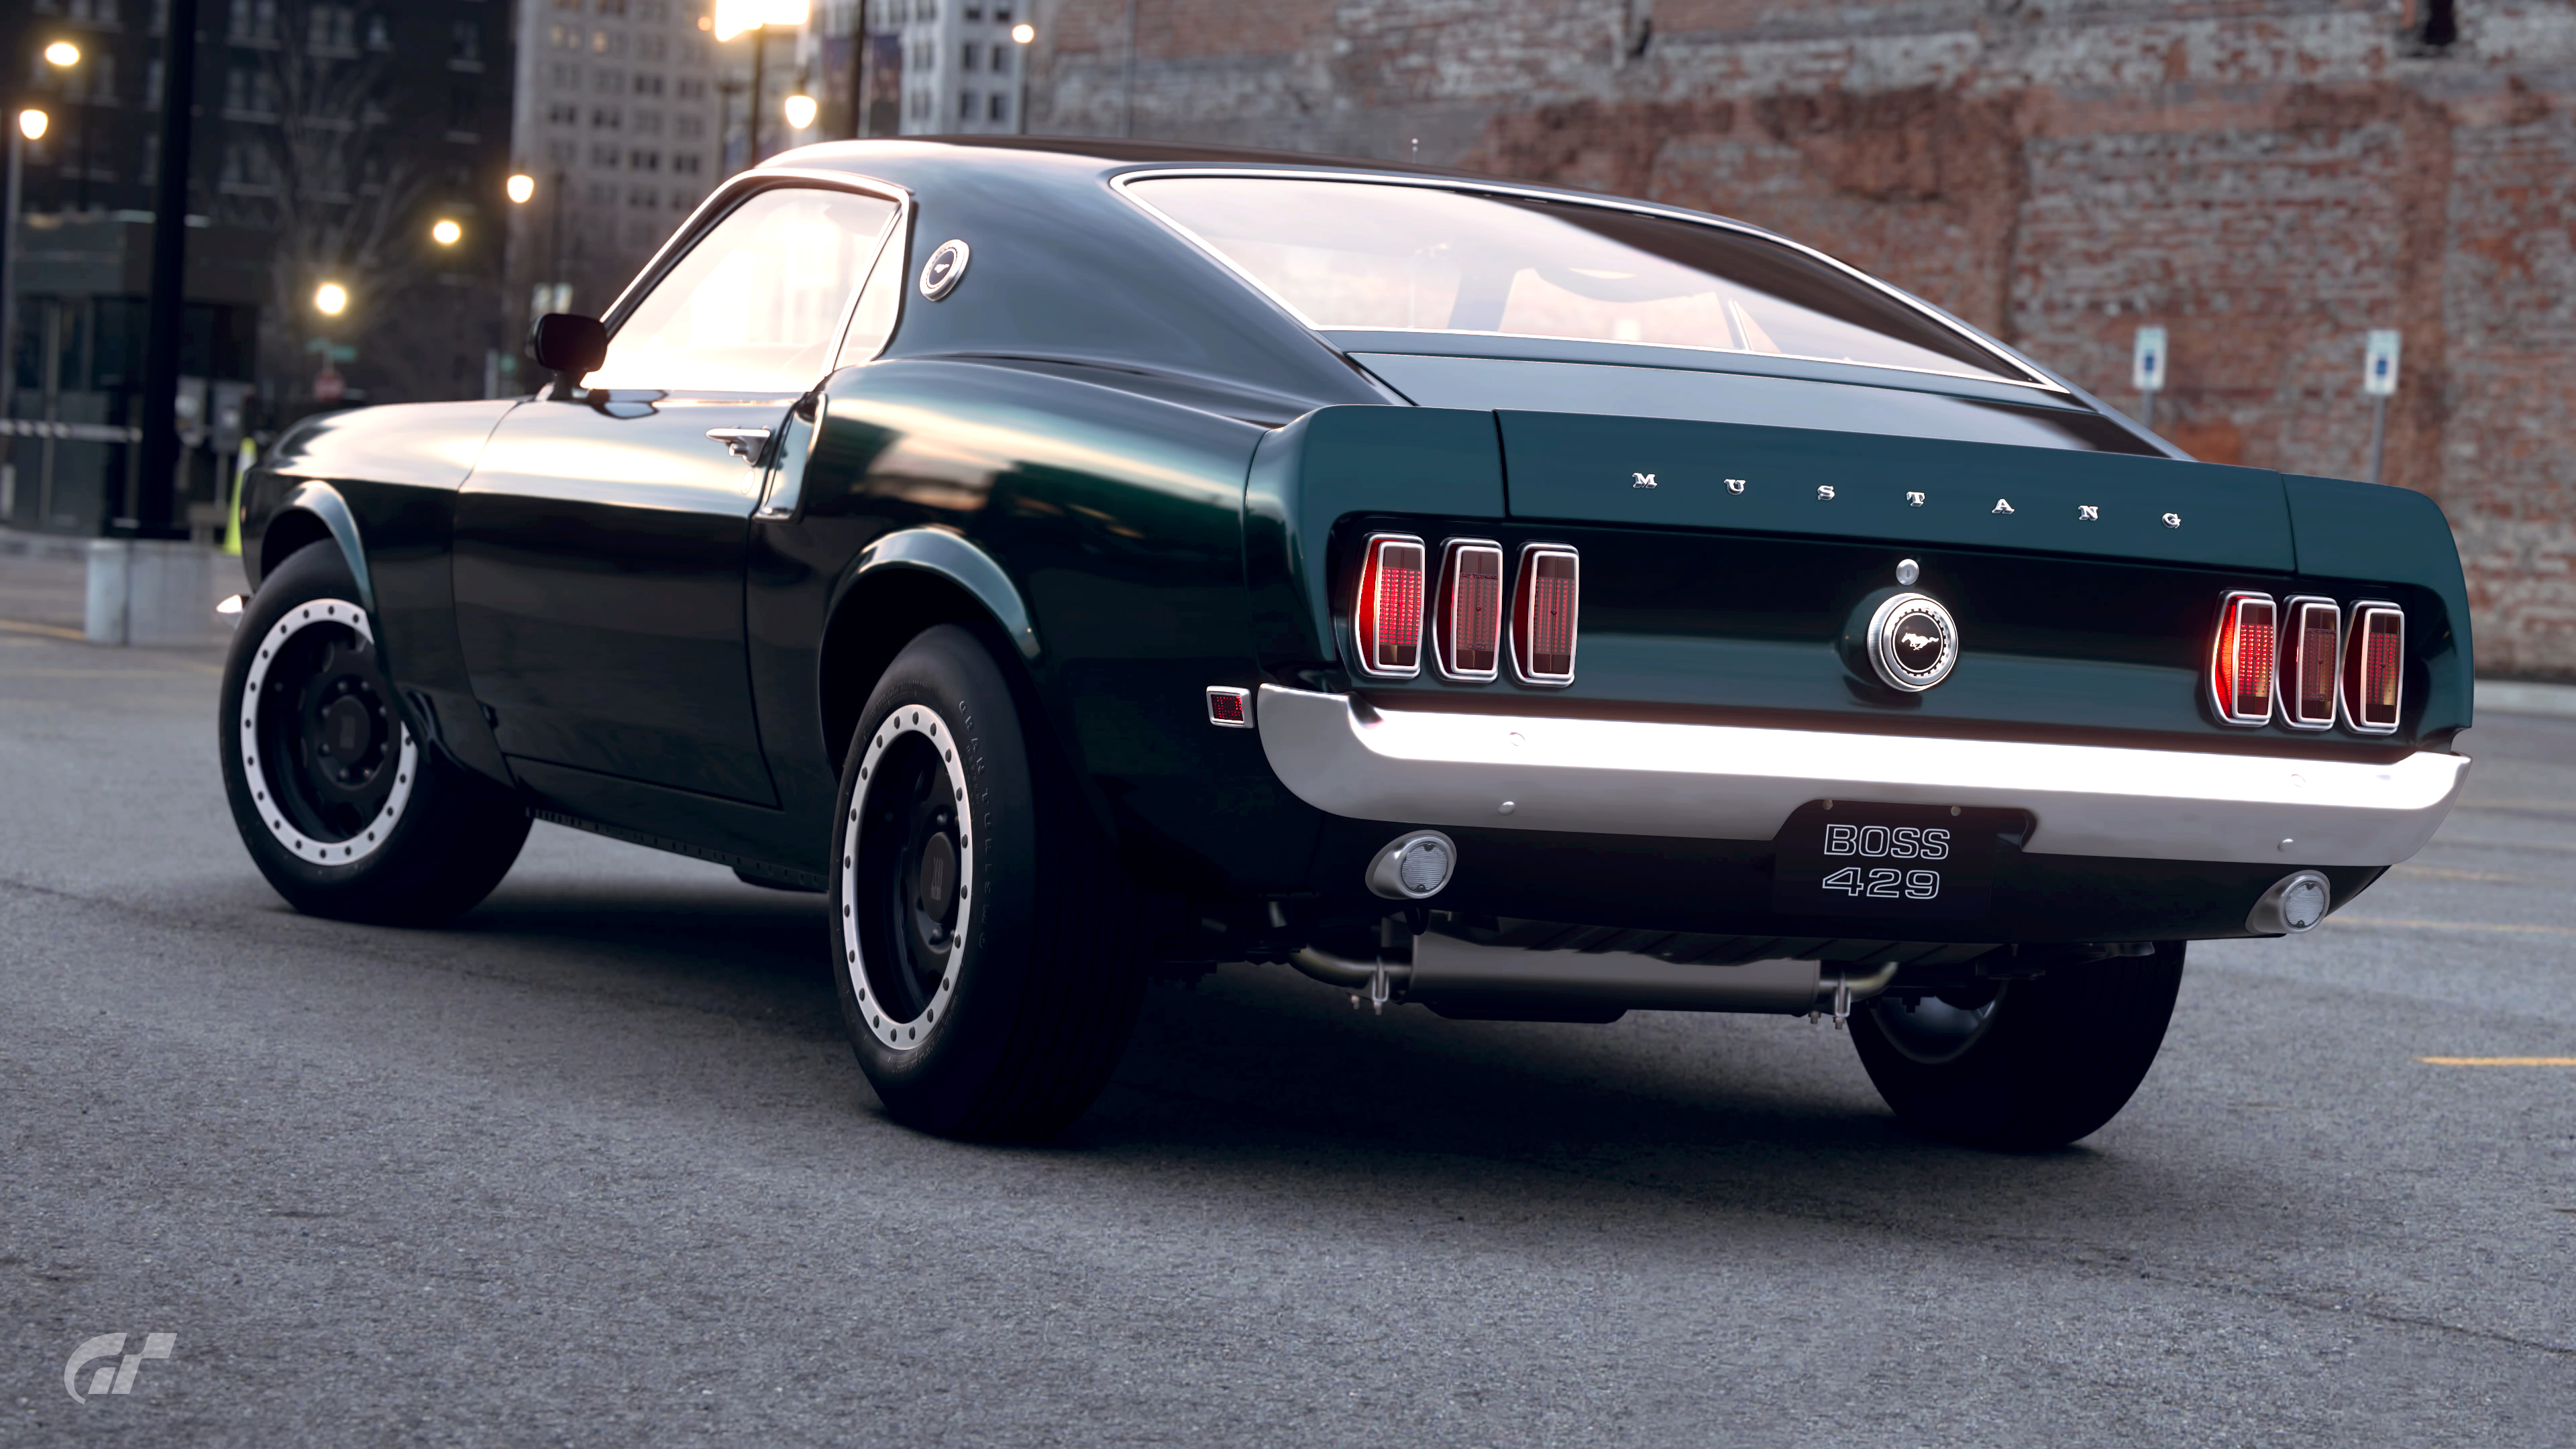 Gran Turismo 7 Mustang Gr4 by WitchWandaMaximoff on DeviantArt